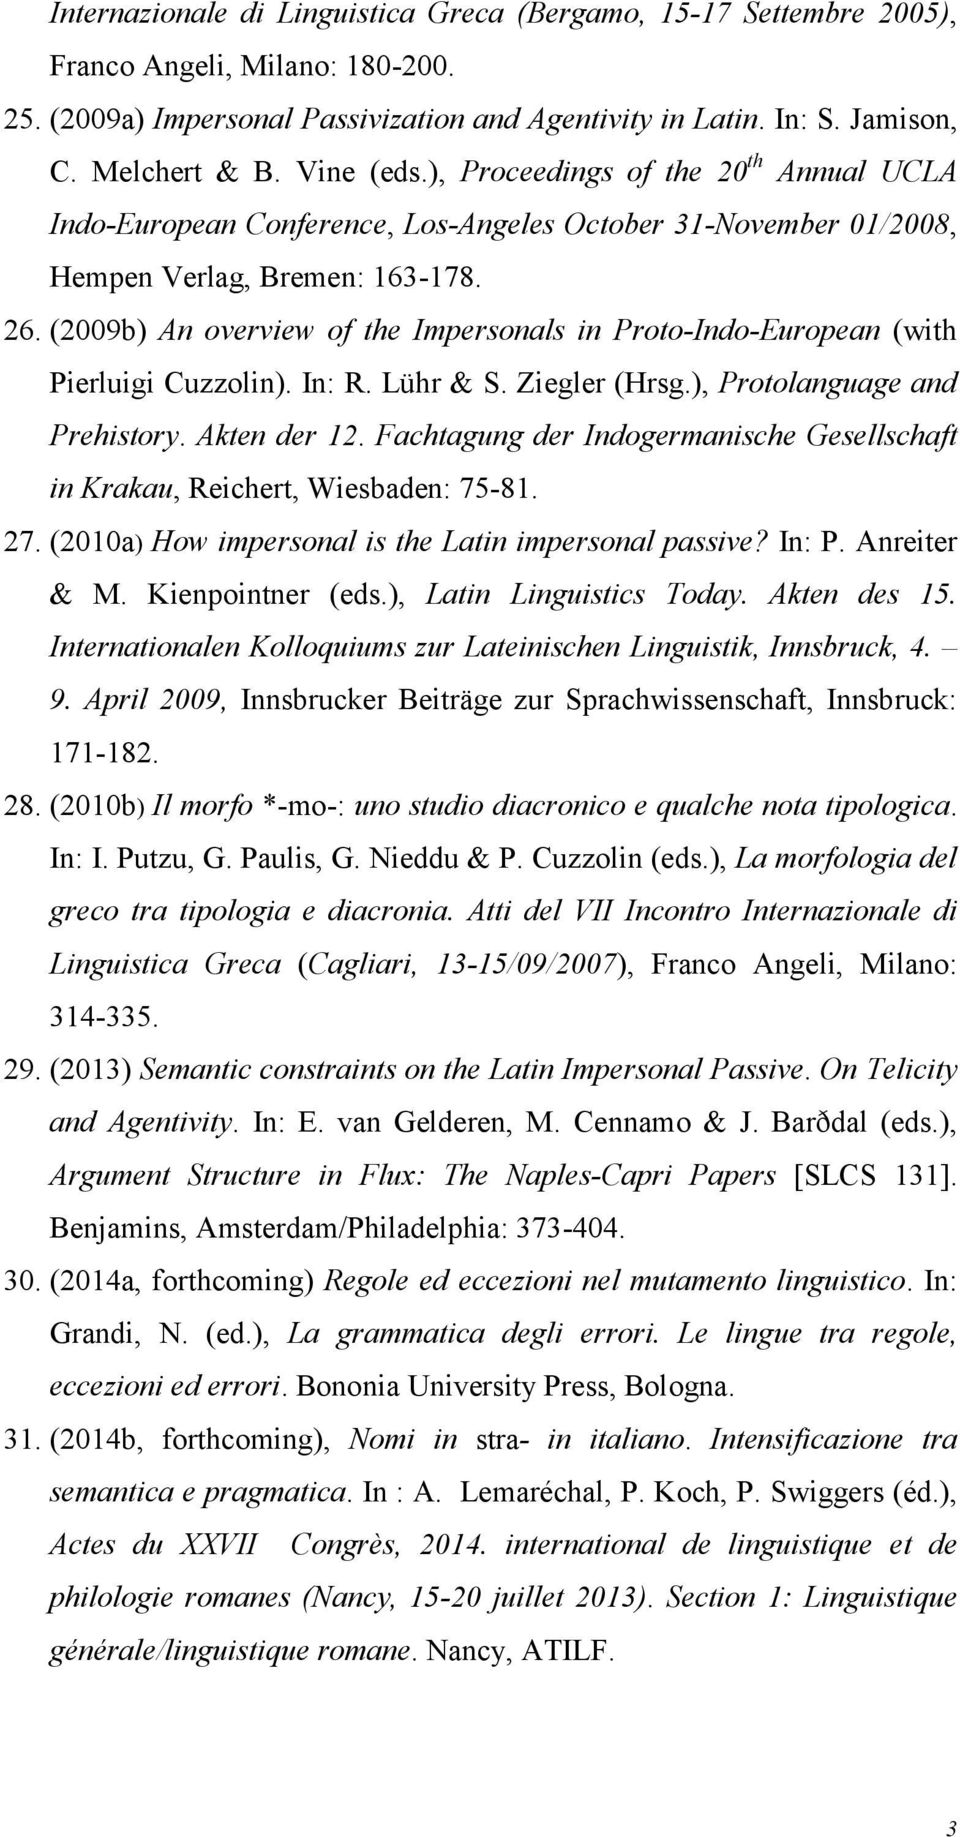 (2009b) An overview of the Impersonals in Proto-Indo-European (with Pierluigi Cuzzolin). In: R. Lühr & S. Ziegler (Hrsg.), Protolanguage and Prehistory. Akten der 12.